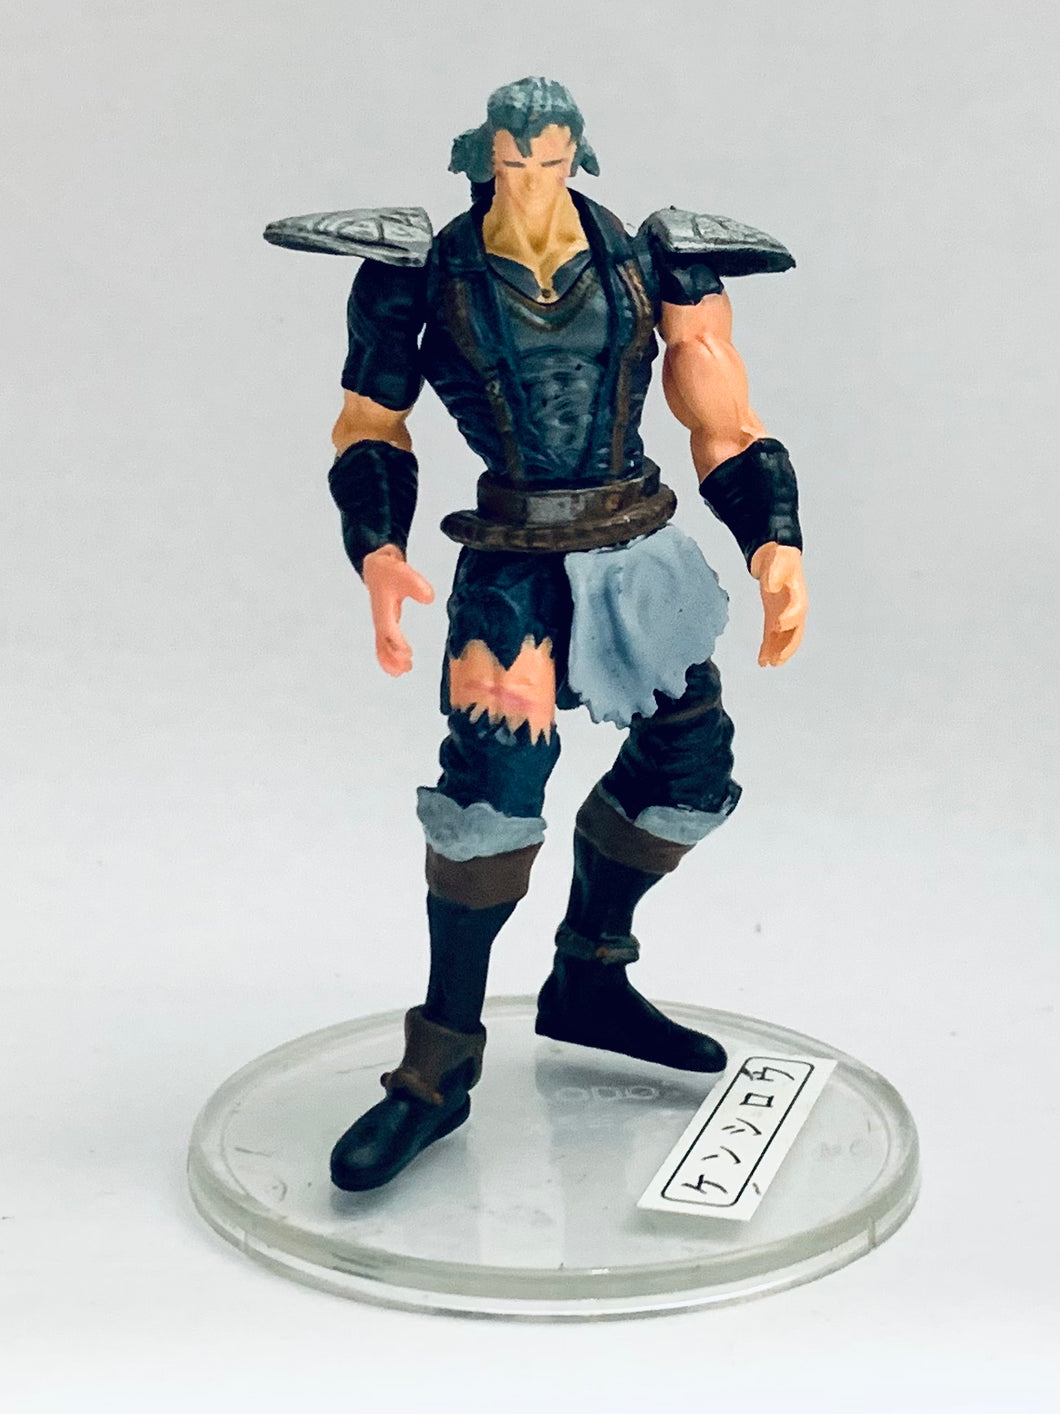 Hokuto no Ken - Shu - Fist of the North Star All-Star Retsuden Capsule Figure Collection Part 1